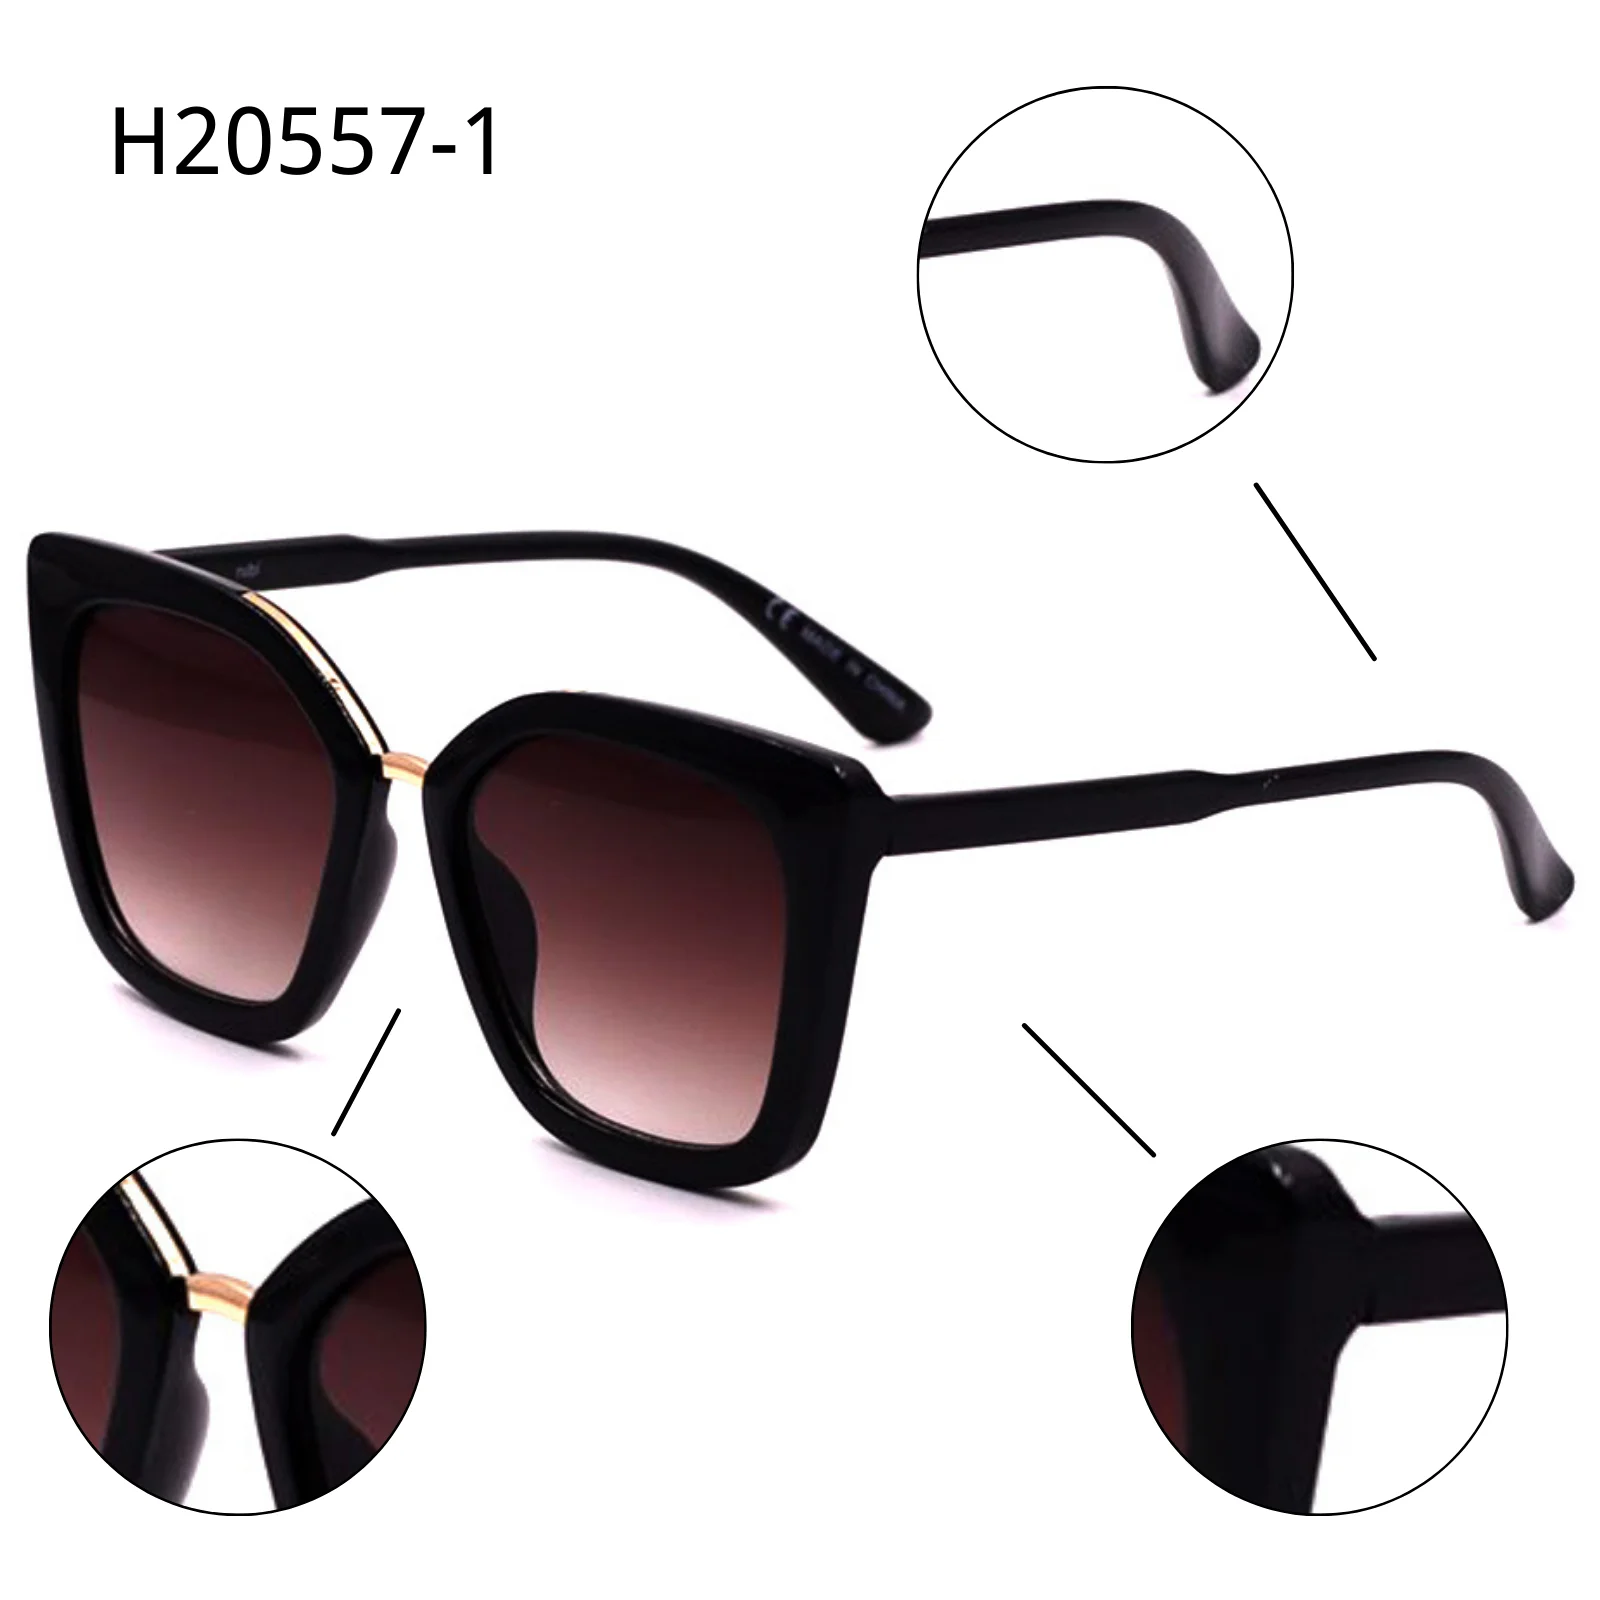 

VIFF HP20557 Vintage Big Frame Sun Glasses River Hot Amazon Seller Chinese Manufacturer Fashion Women Oversized Sunglasses, Multy and can be customized